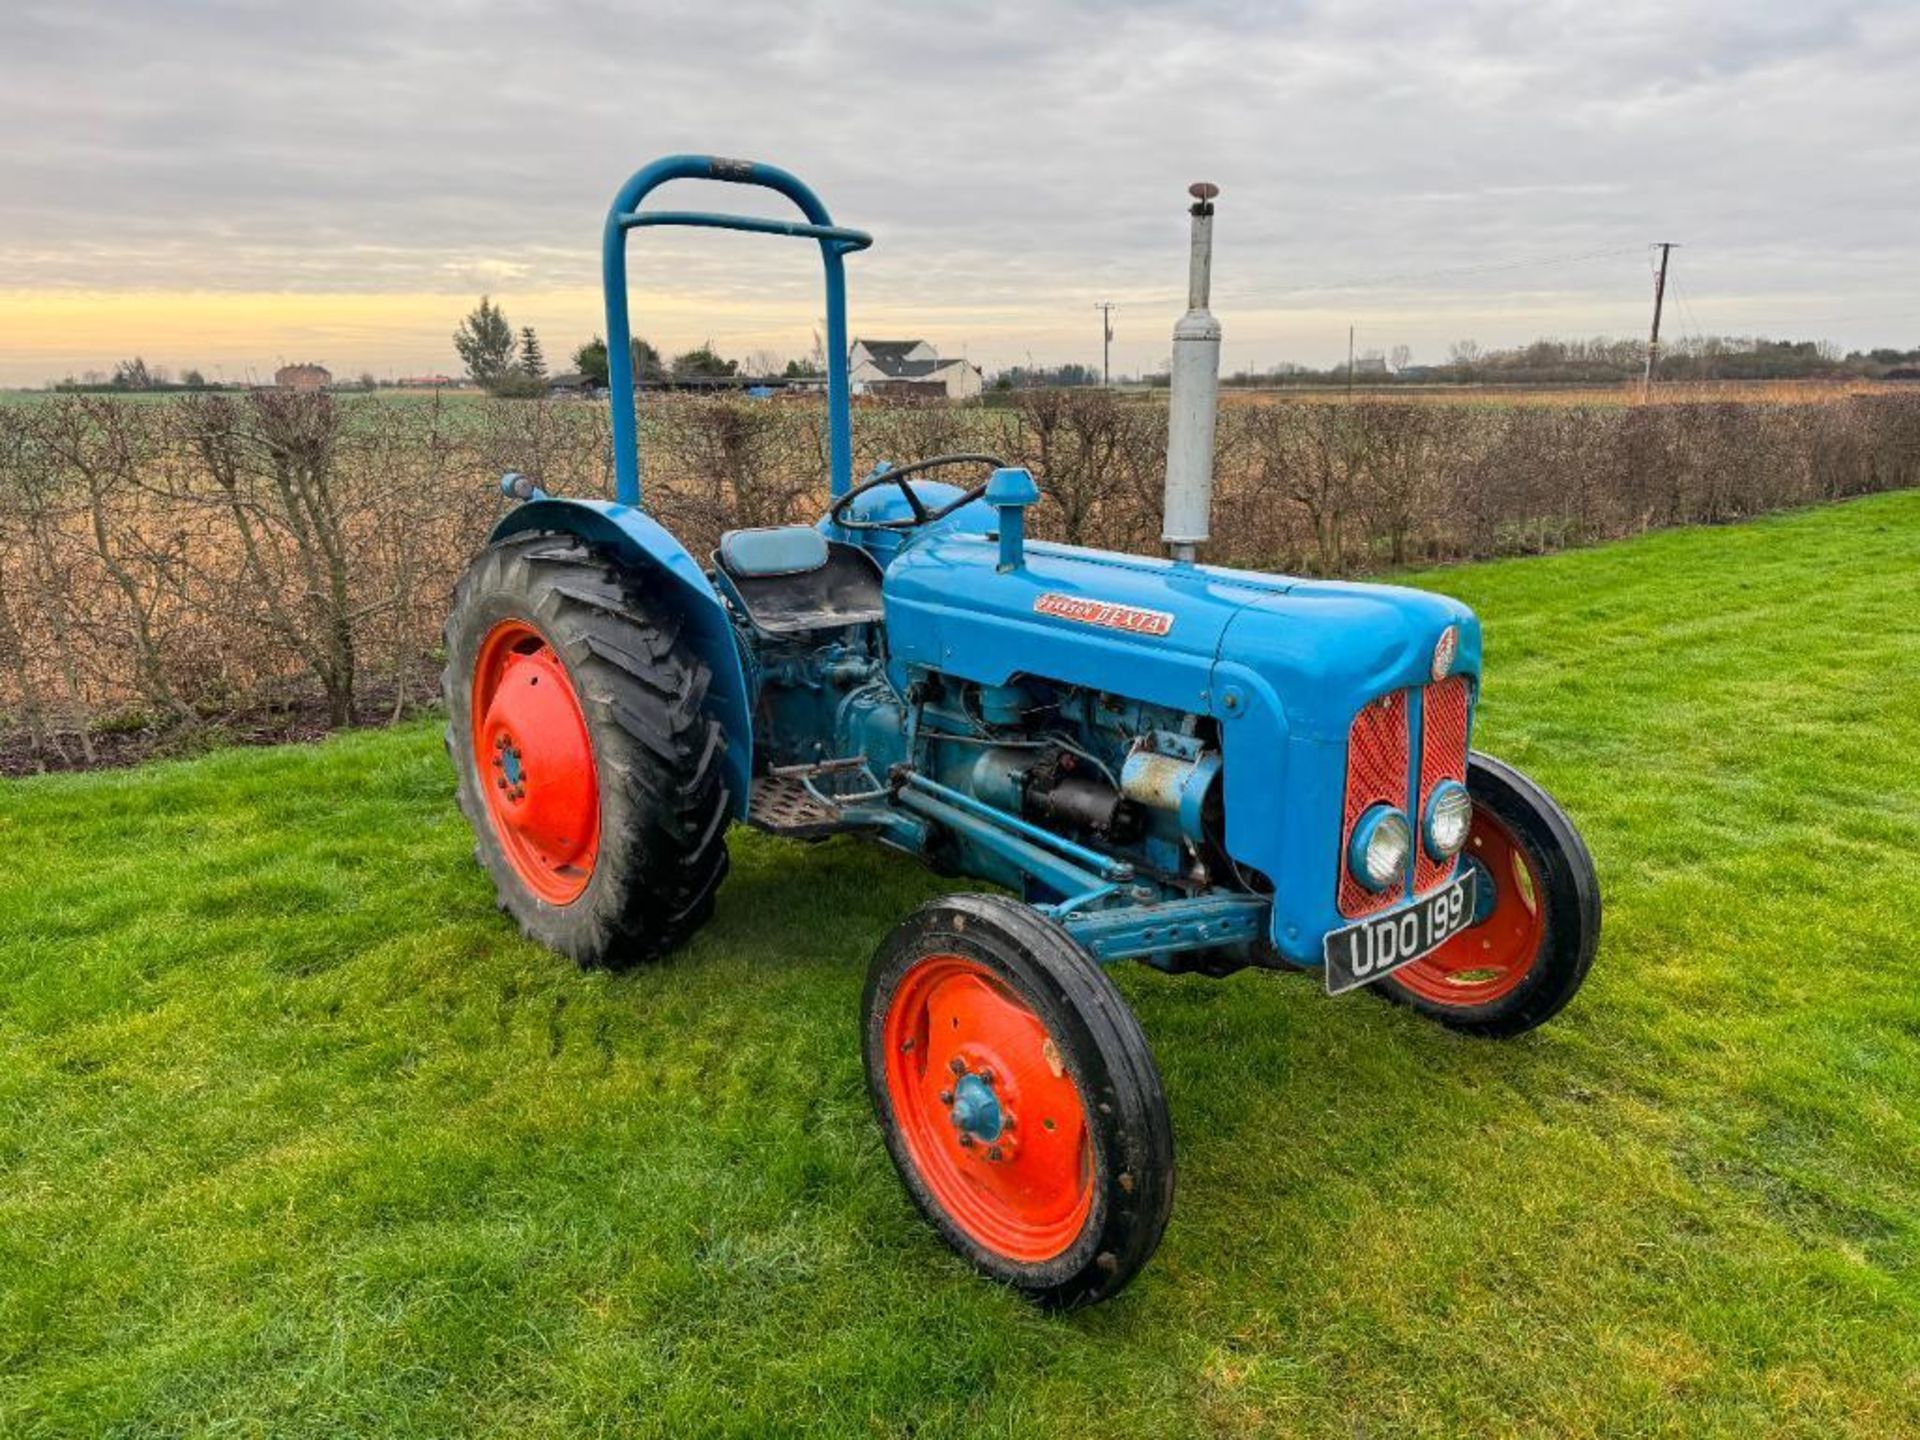 1962 Fordson Dexta 2wd diesel tractor with pick up hitch, rear linkage and rollbar on 12.4/11-28 rea - Image 8 of 14